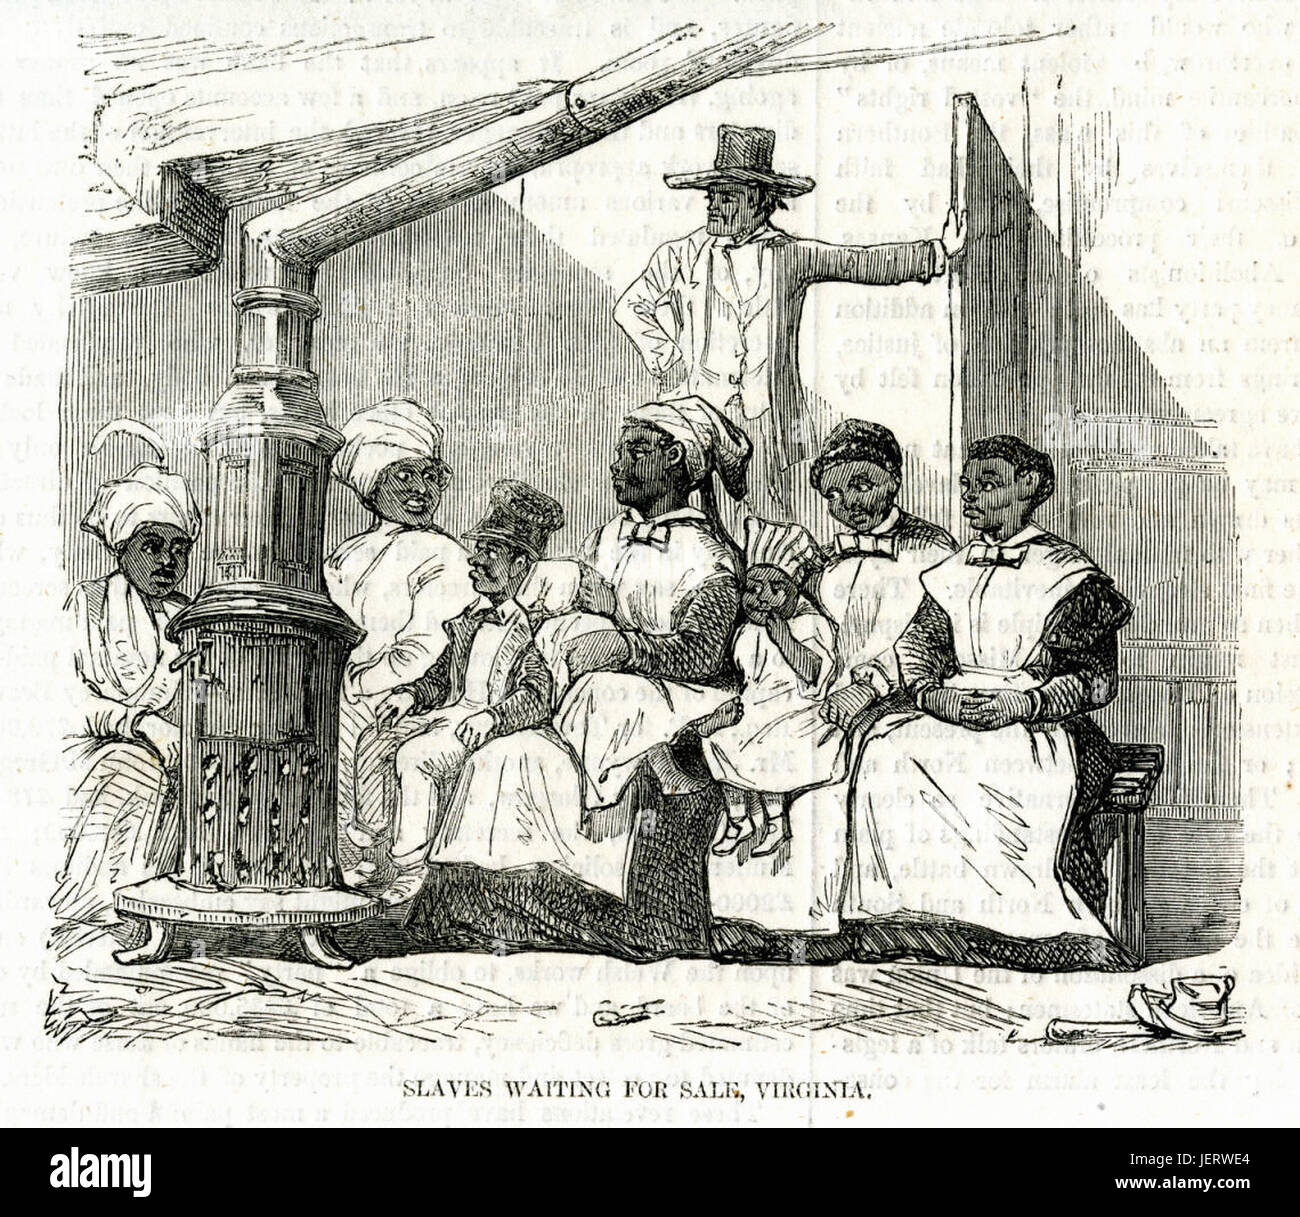 Slaves waiting for sale, Virginia Stock Photo